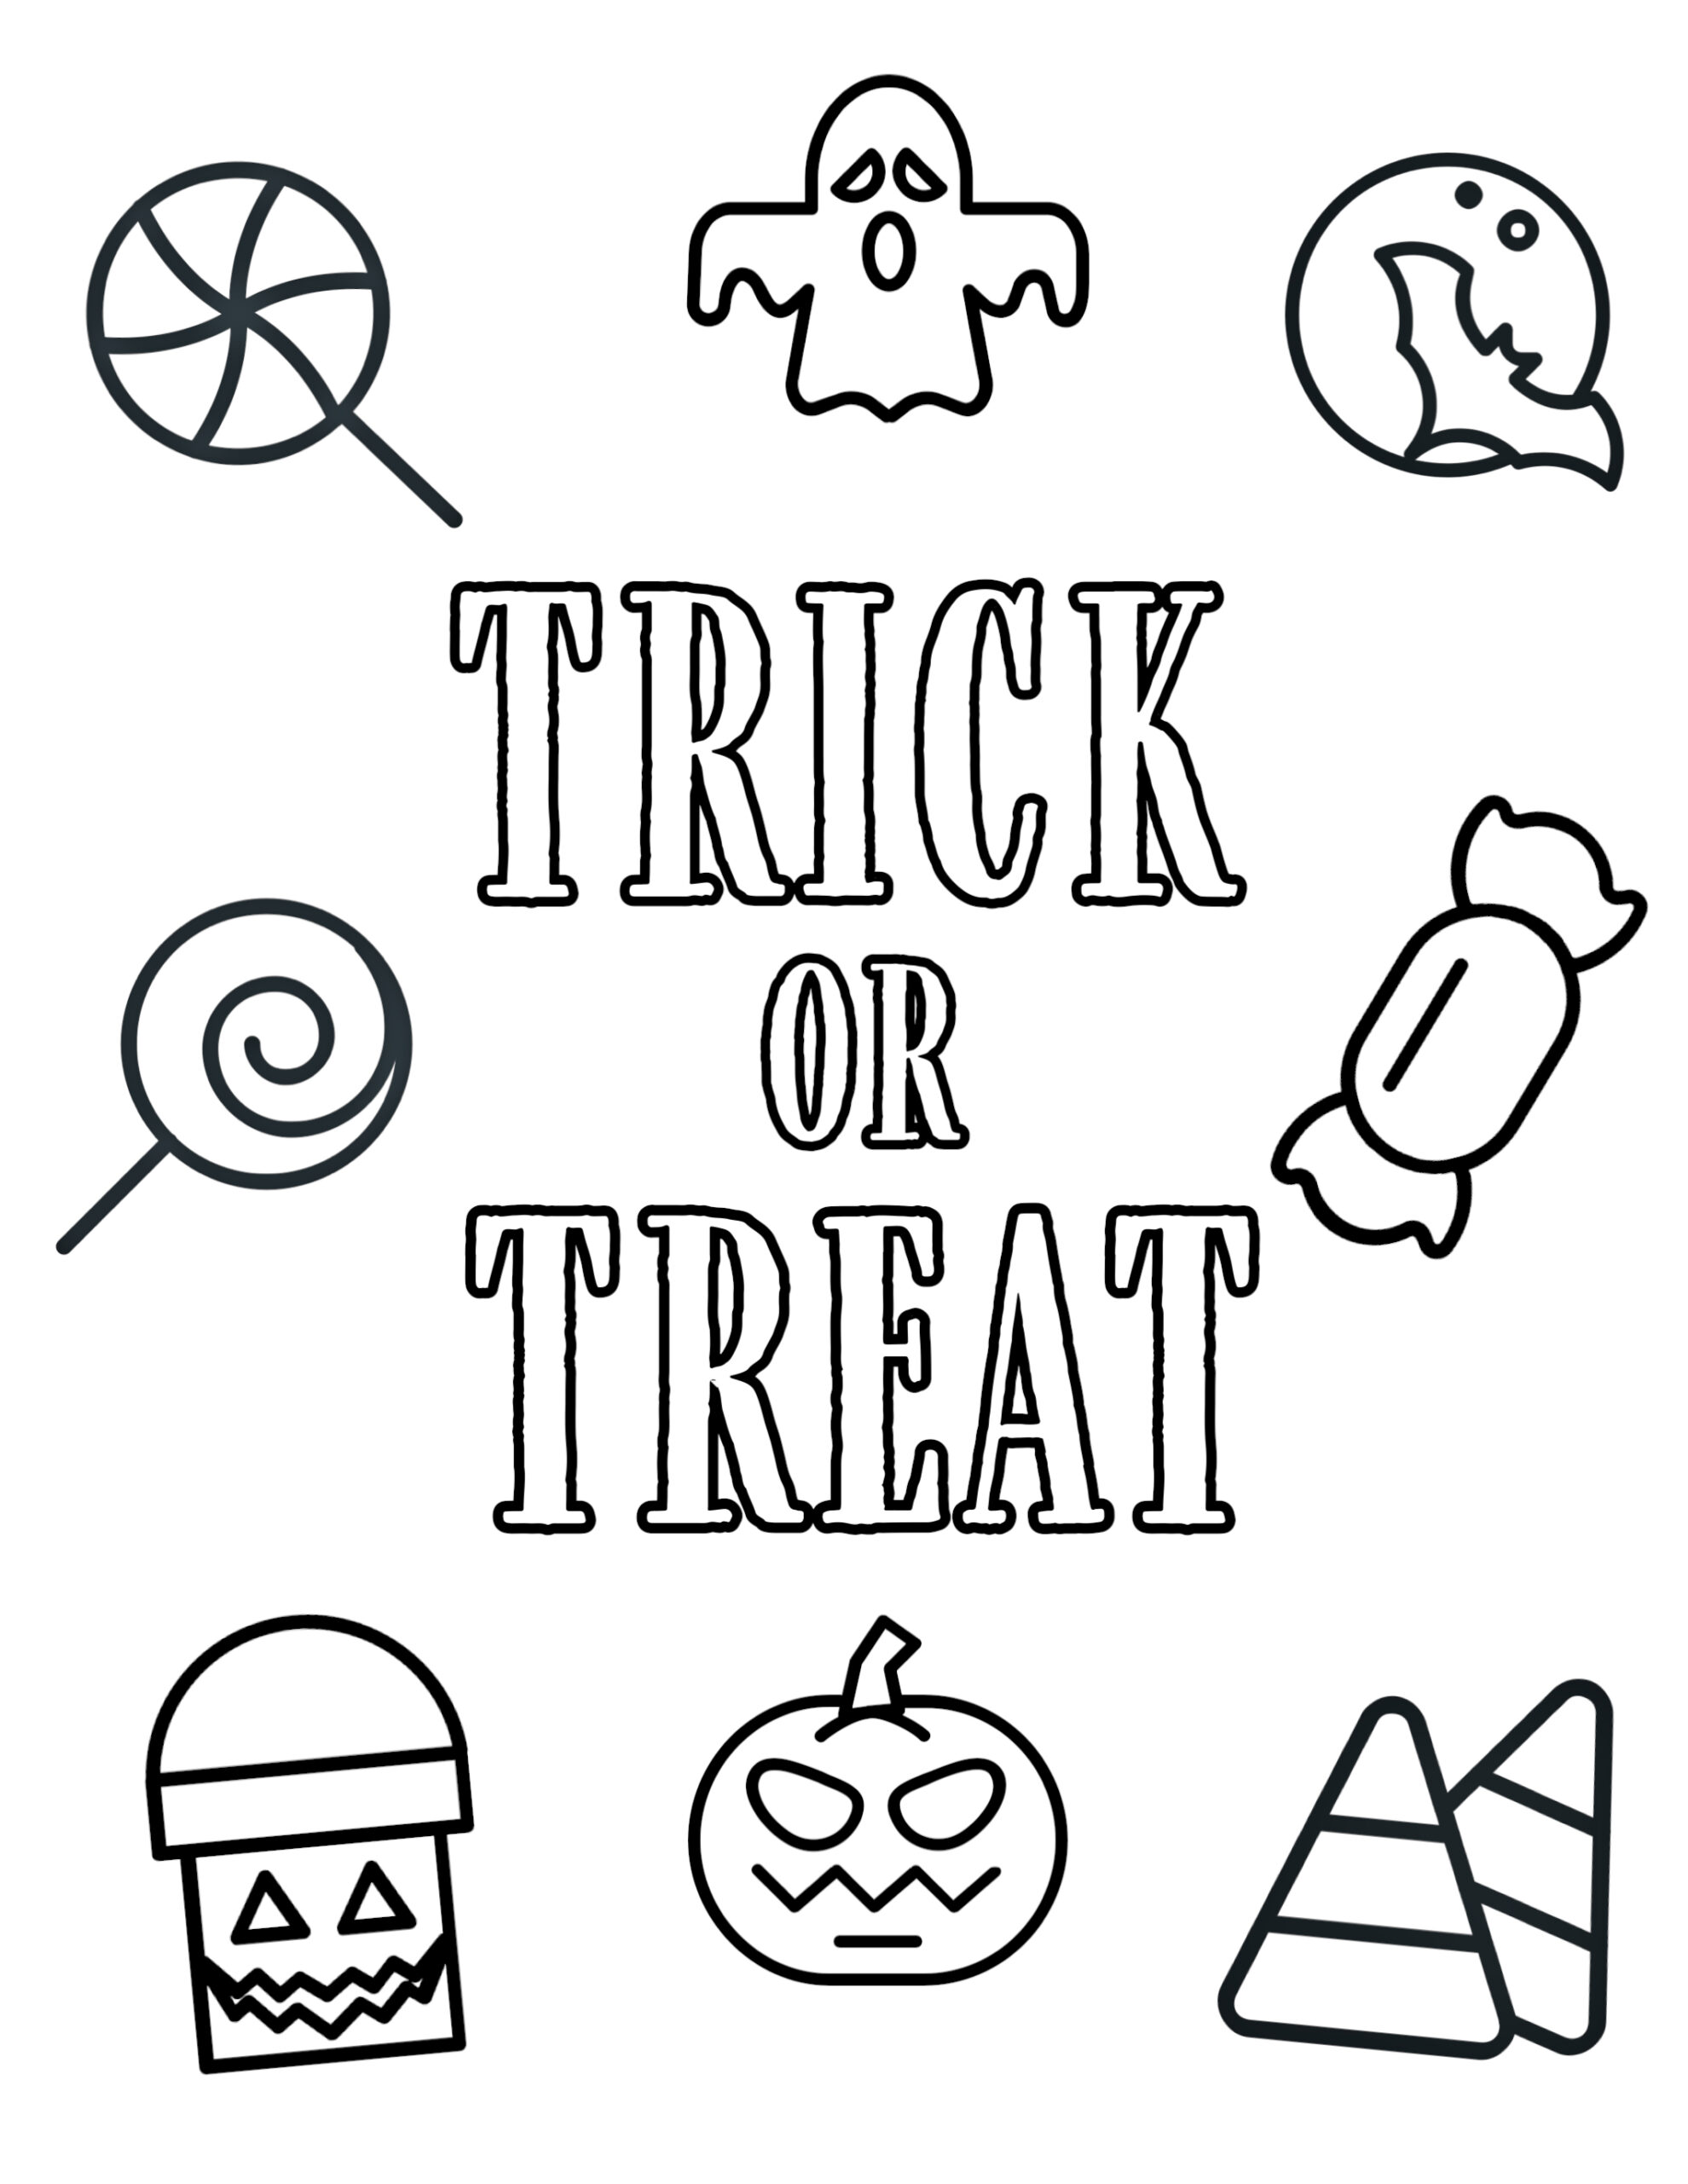 Happy Halloween Coloring Pages 75 Halloween Coloring Pages Free